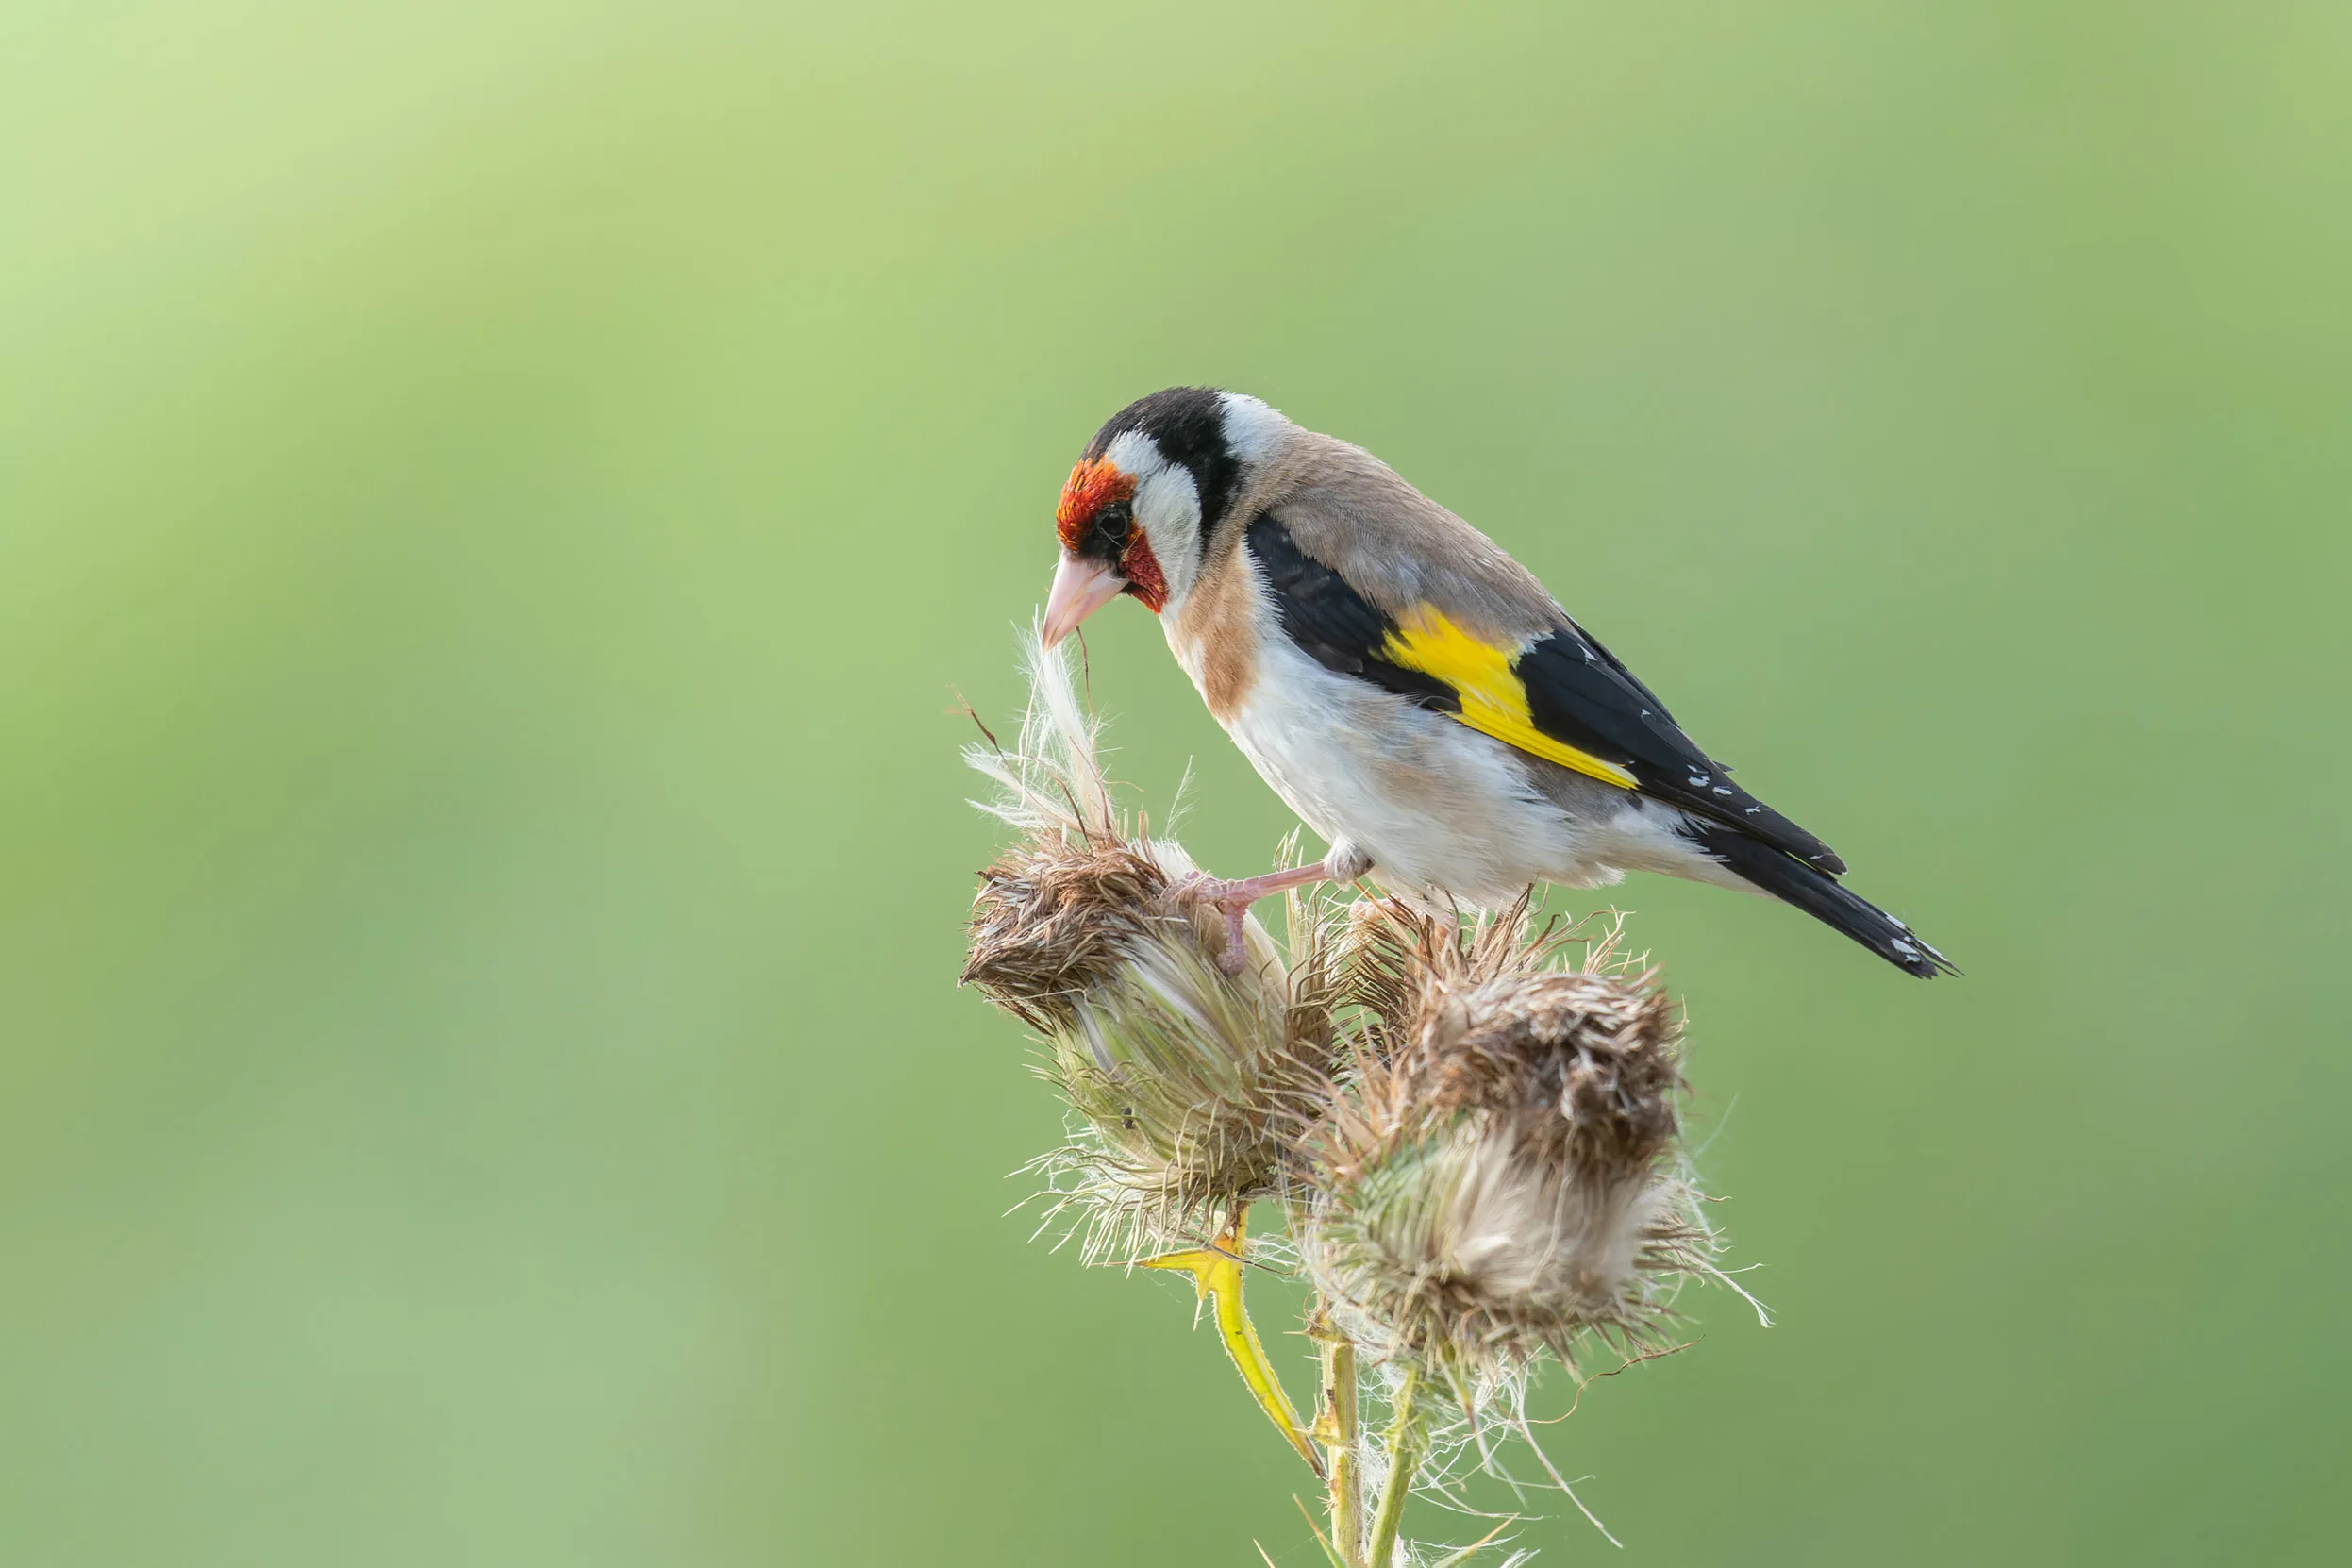 A lone Goldfinch perched on the seedhead of a dried teasel, pulling the fluffy seeds out with their beak.